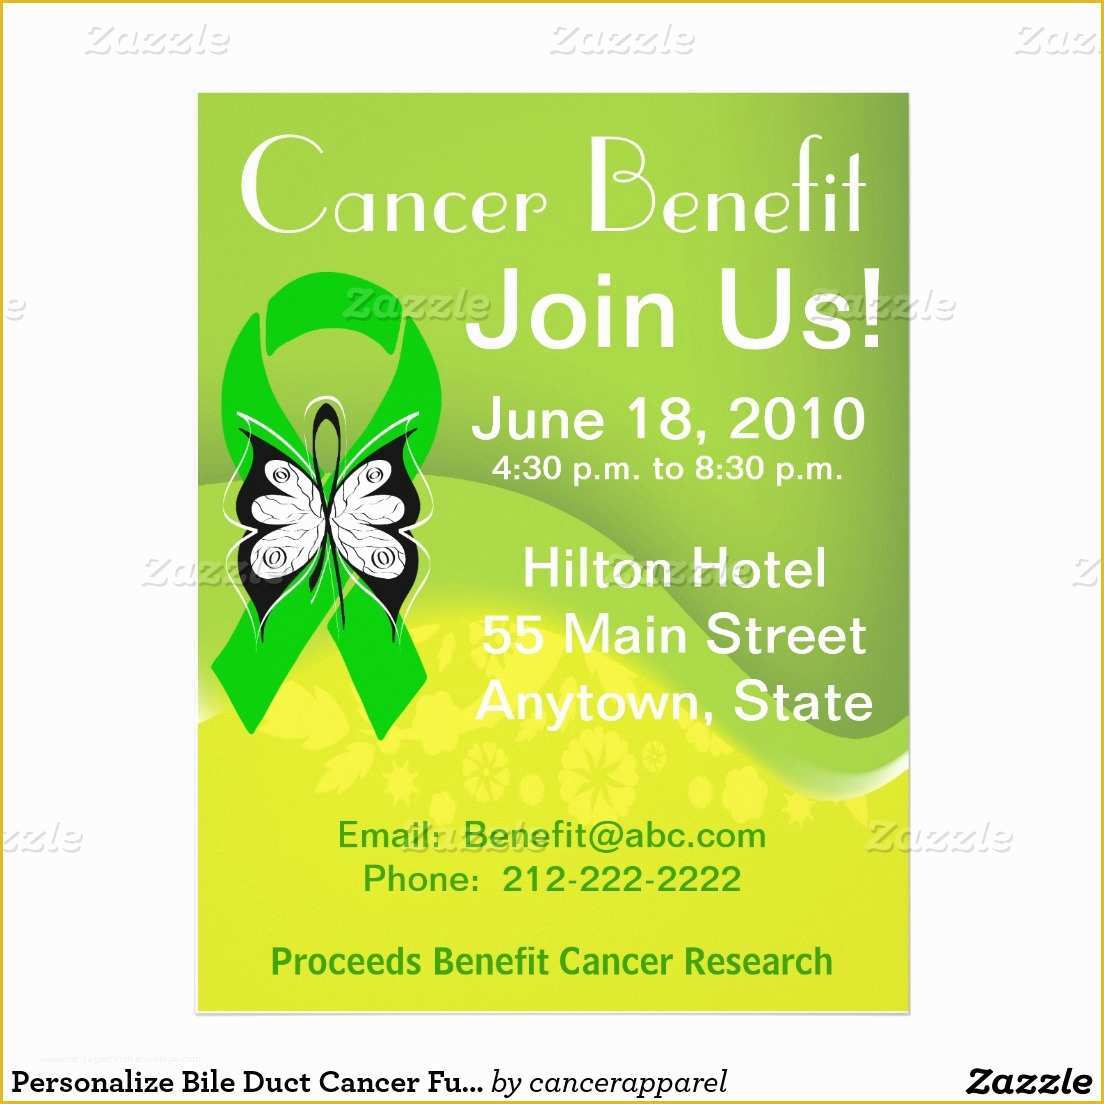 Free Printable Fundraiser Flyer Templates Of Personalize Bile Duct Cancer Fundraising Benefit Flyer